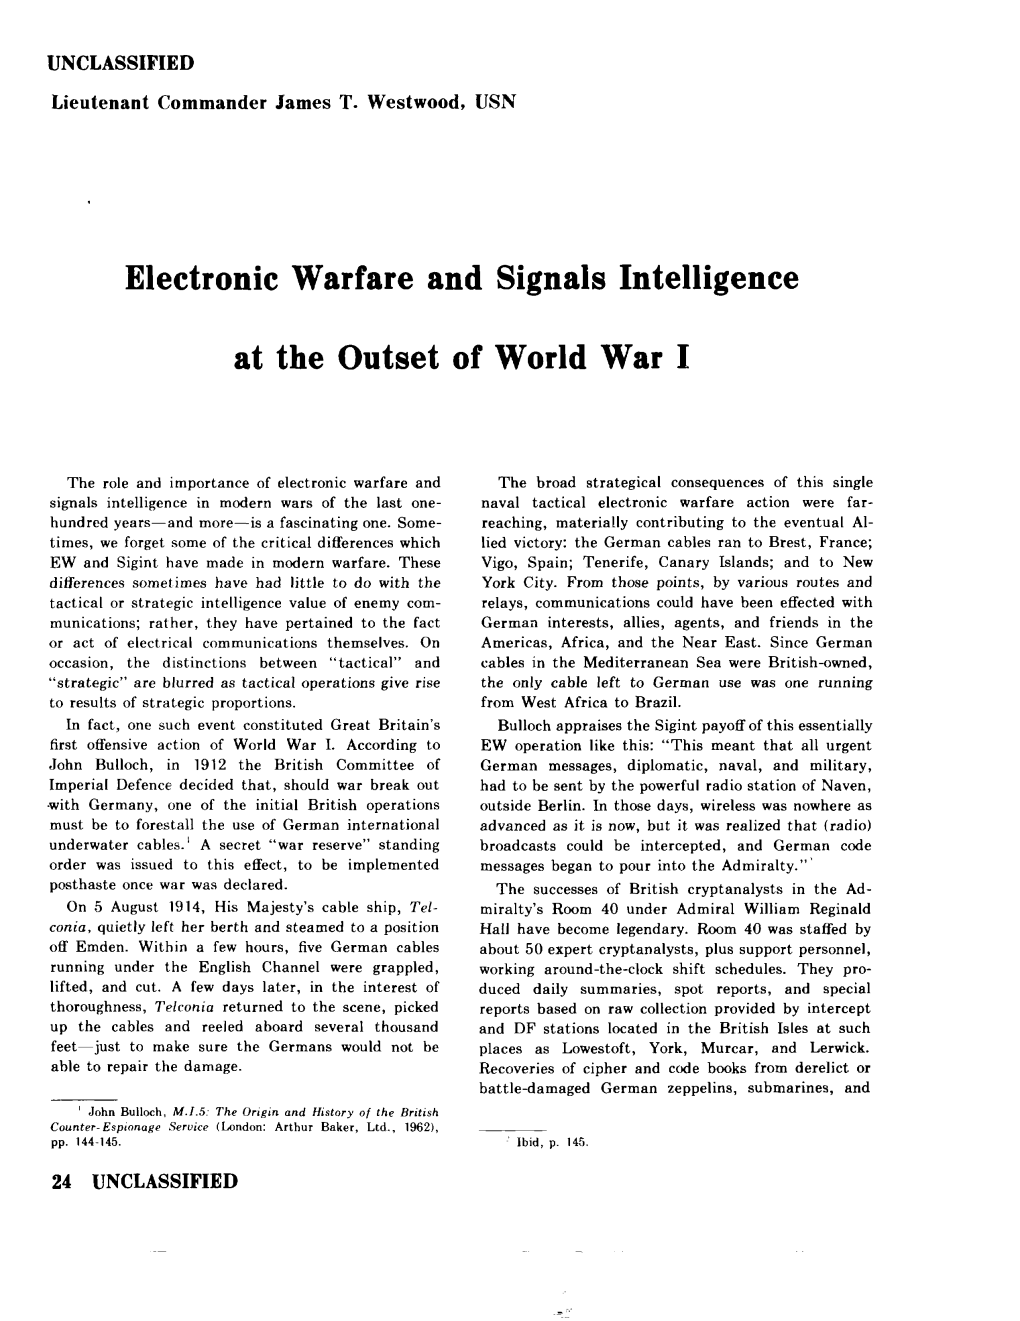 Electronic Warfare and Signals Intelligence at the Outset of World